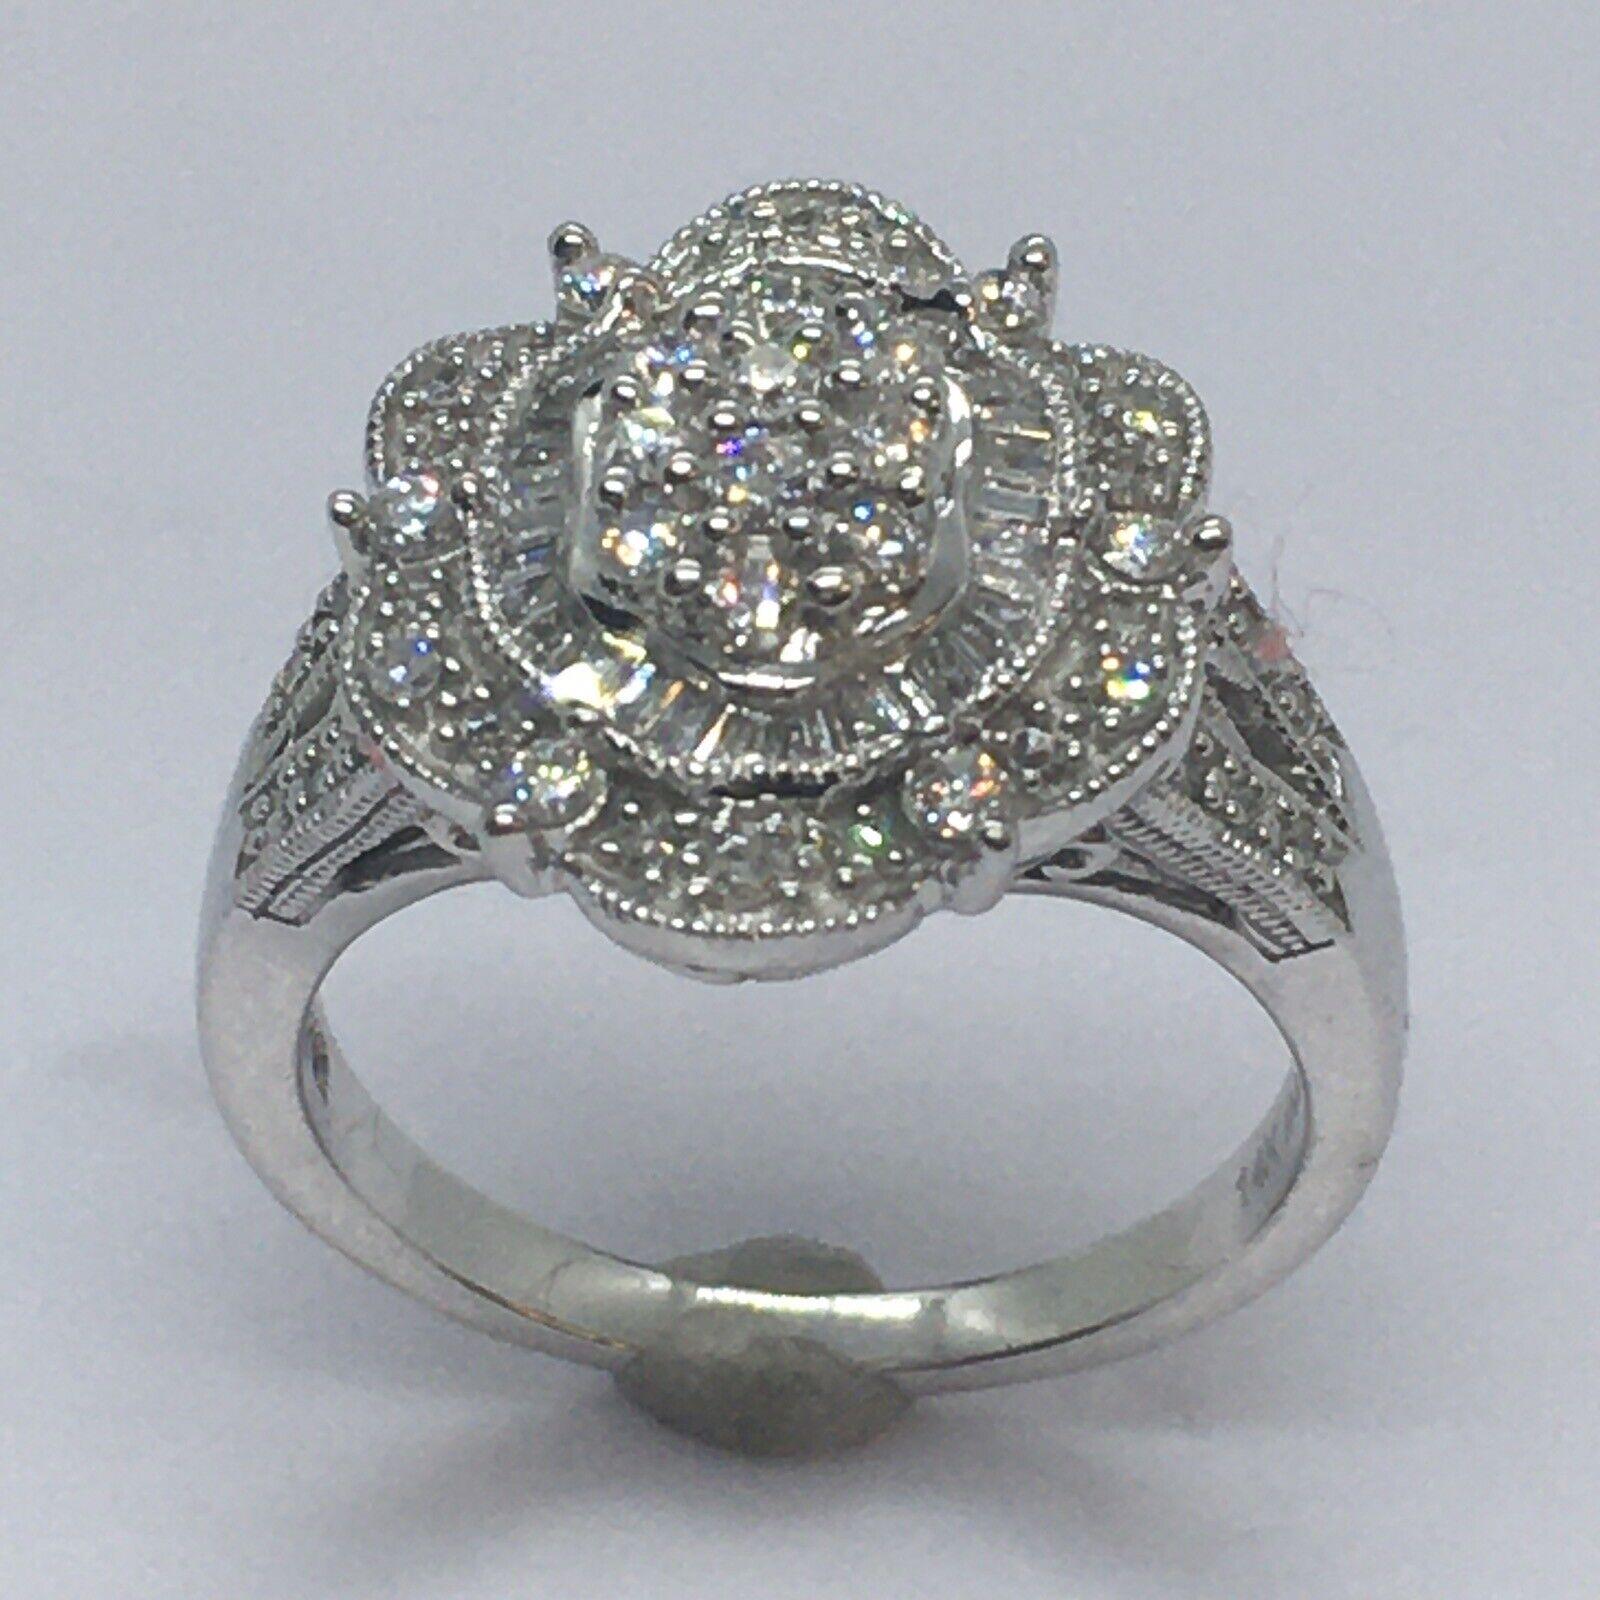 
14K White Gold 1 Carat Total Diamond Cluster Ring Size 8


Size 8
7.3 gram
1 carat diamonds
14K gold, marked and tested 